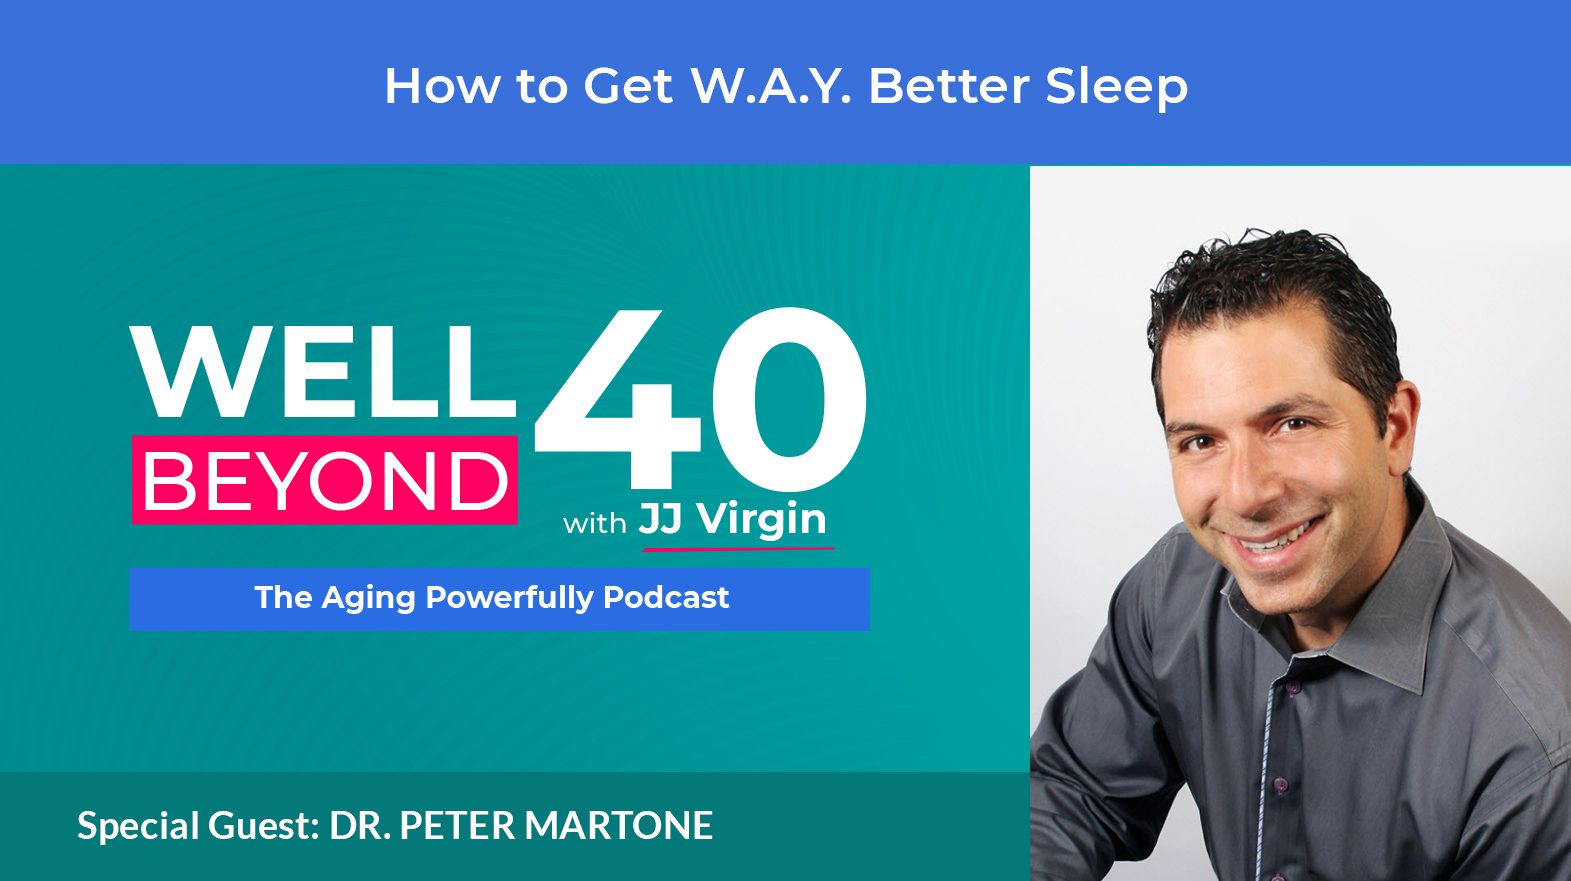 How to Get W.A.Y. Better Sleep with Dr. Peter Martone | Ep. 635